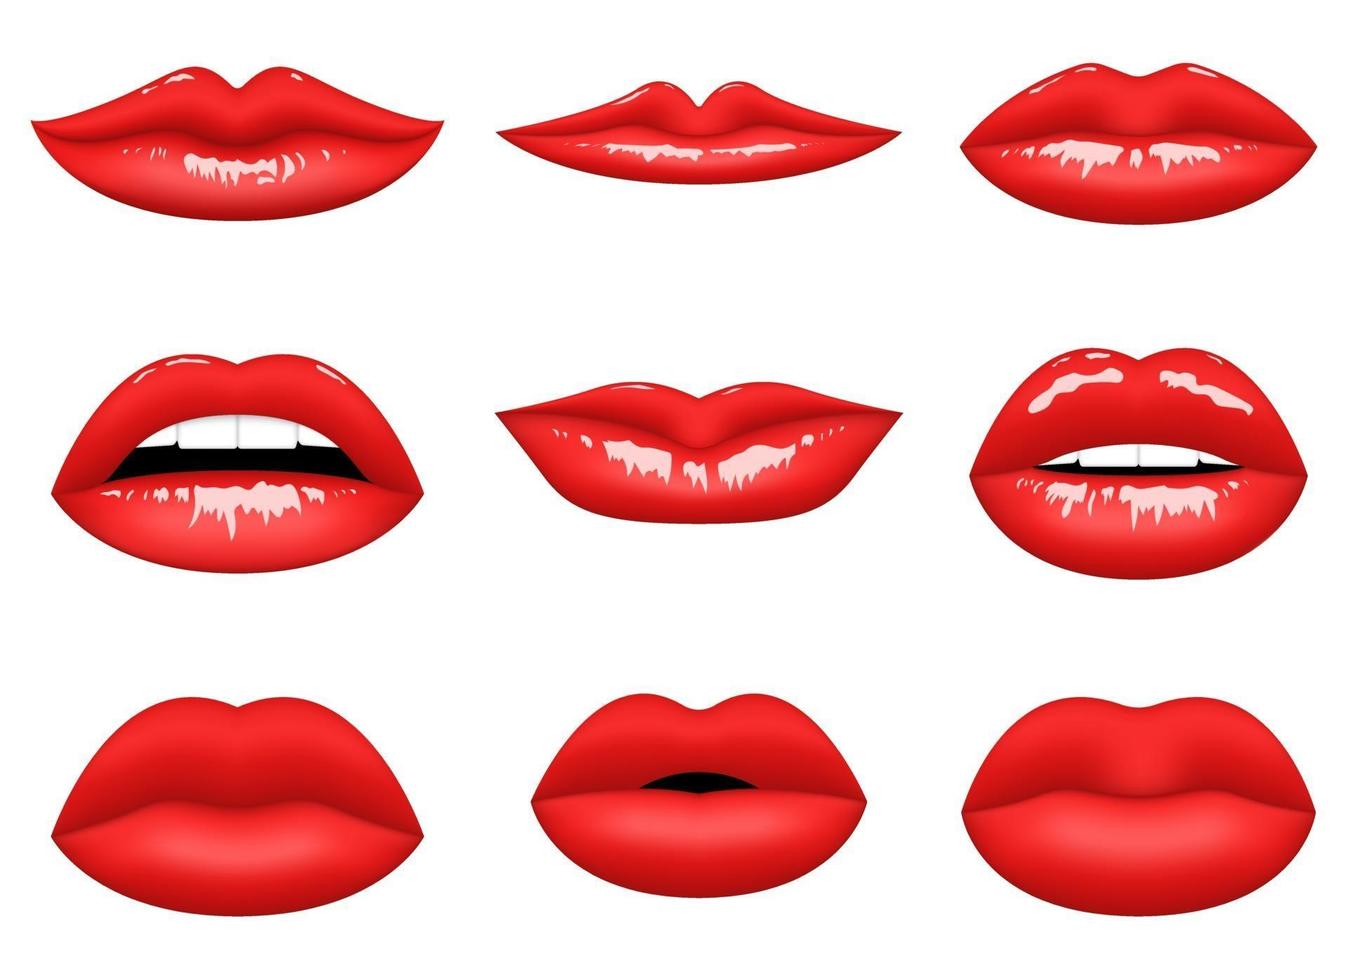 Red woman lips vector design  illustration isolated on white background